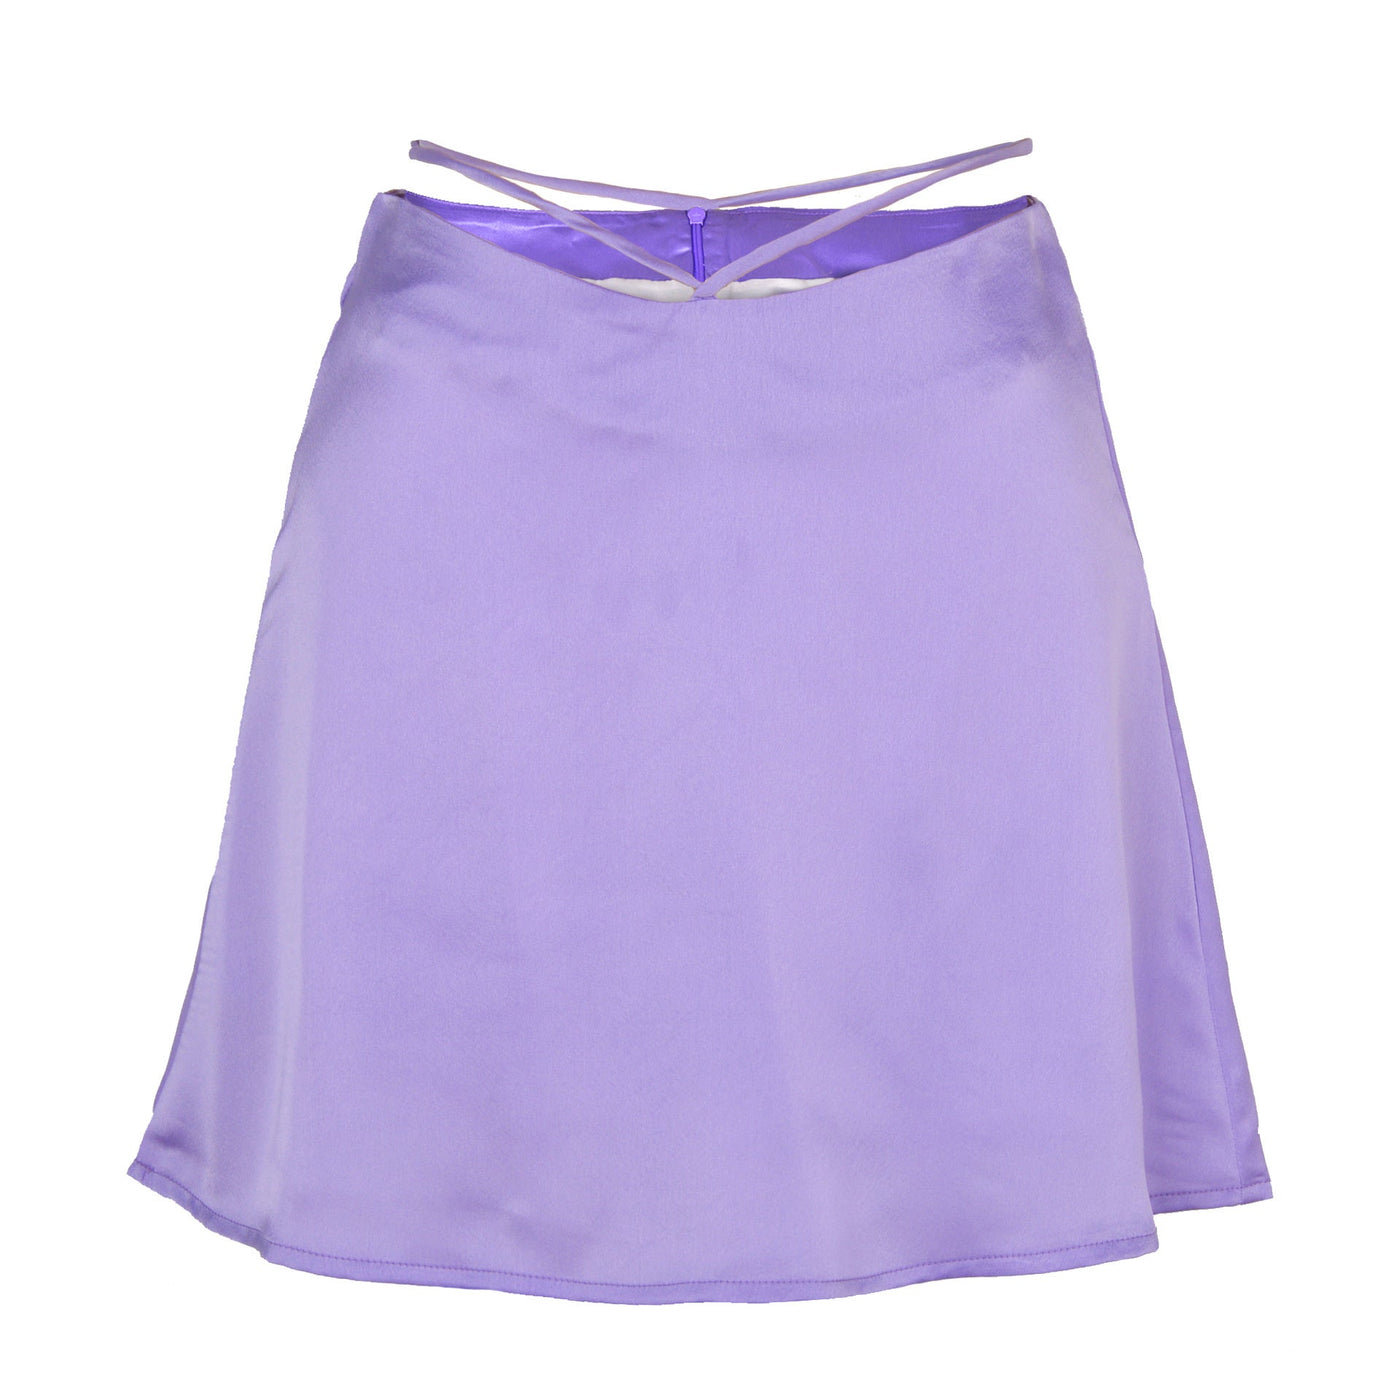 NTG Fad Purple / S New Solid Color Sexy Satin Skirt Fashion Lace Up Zipper High Wait Streetwear Casual Skirts